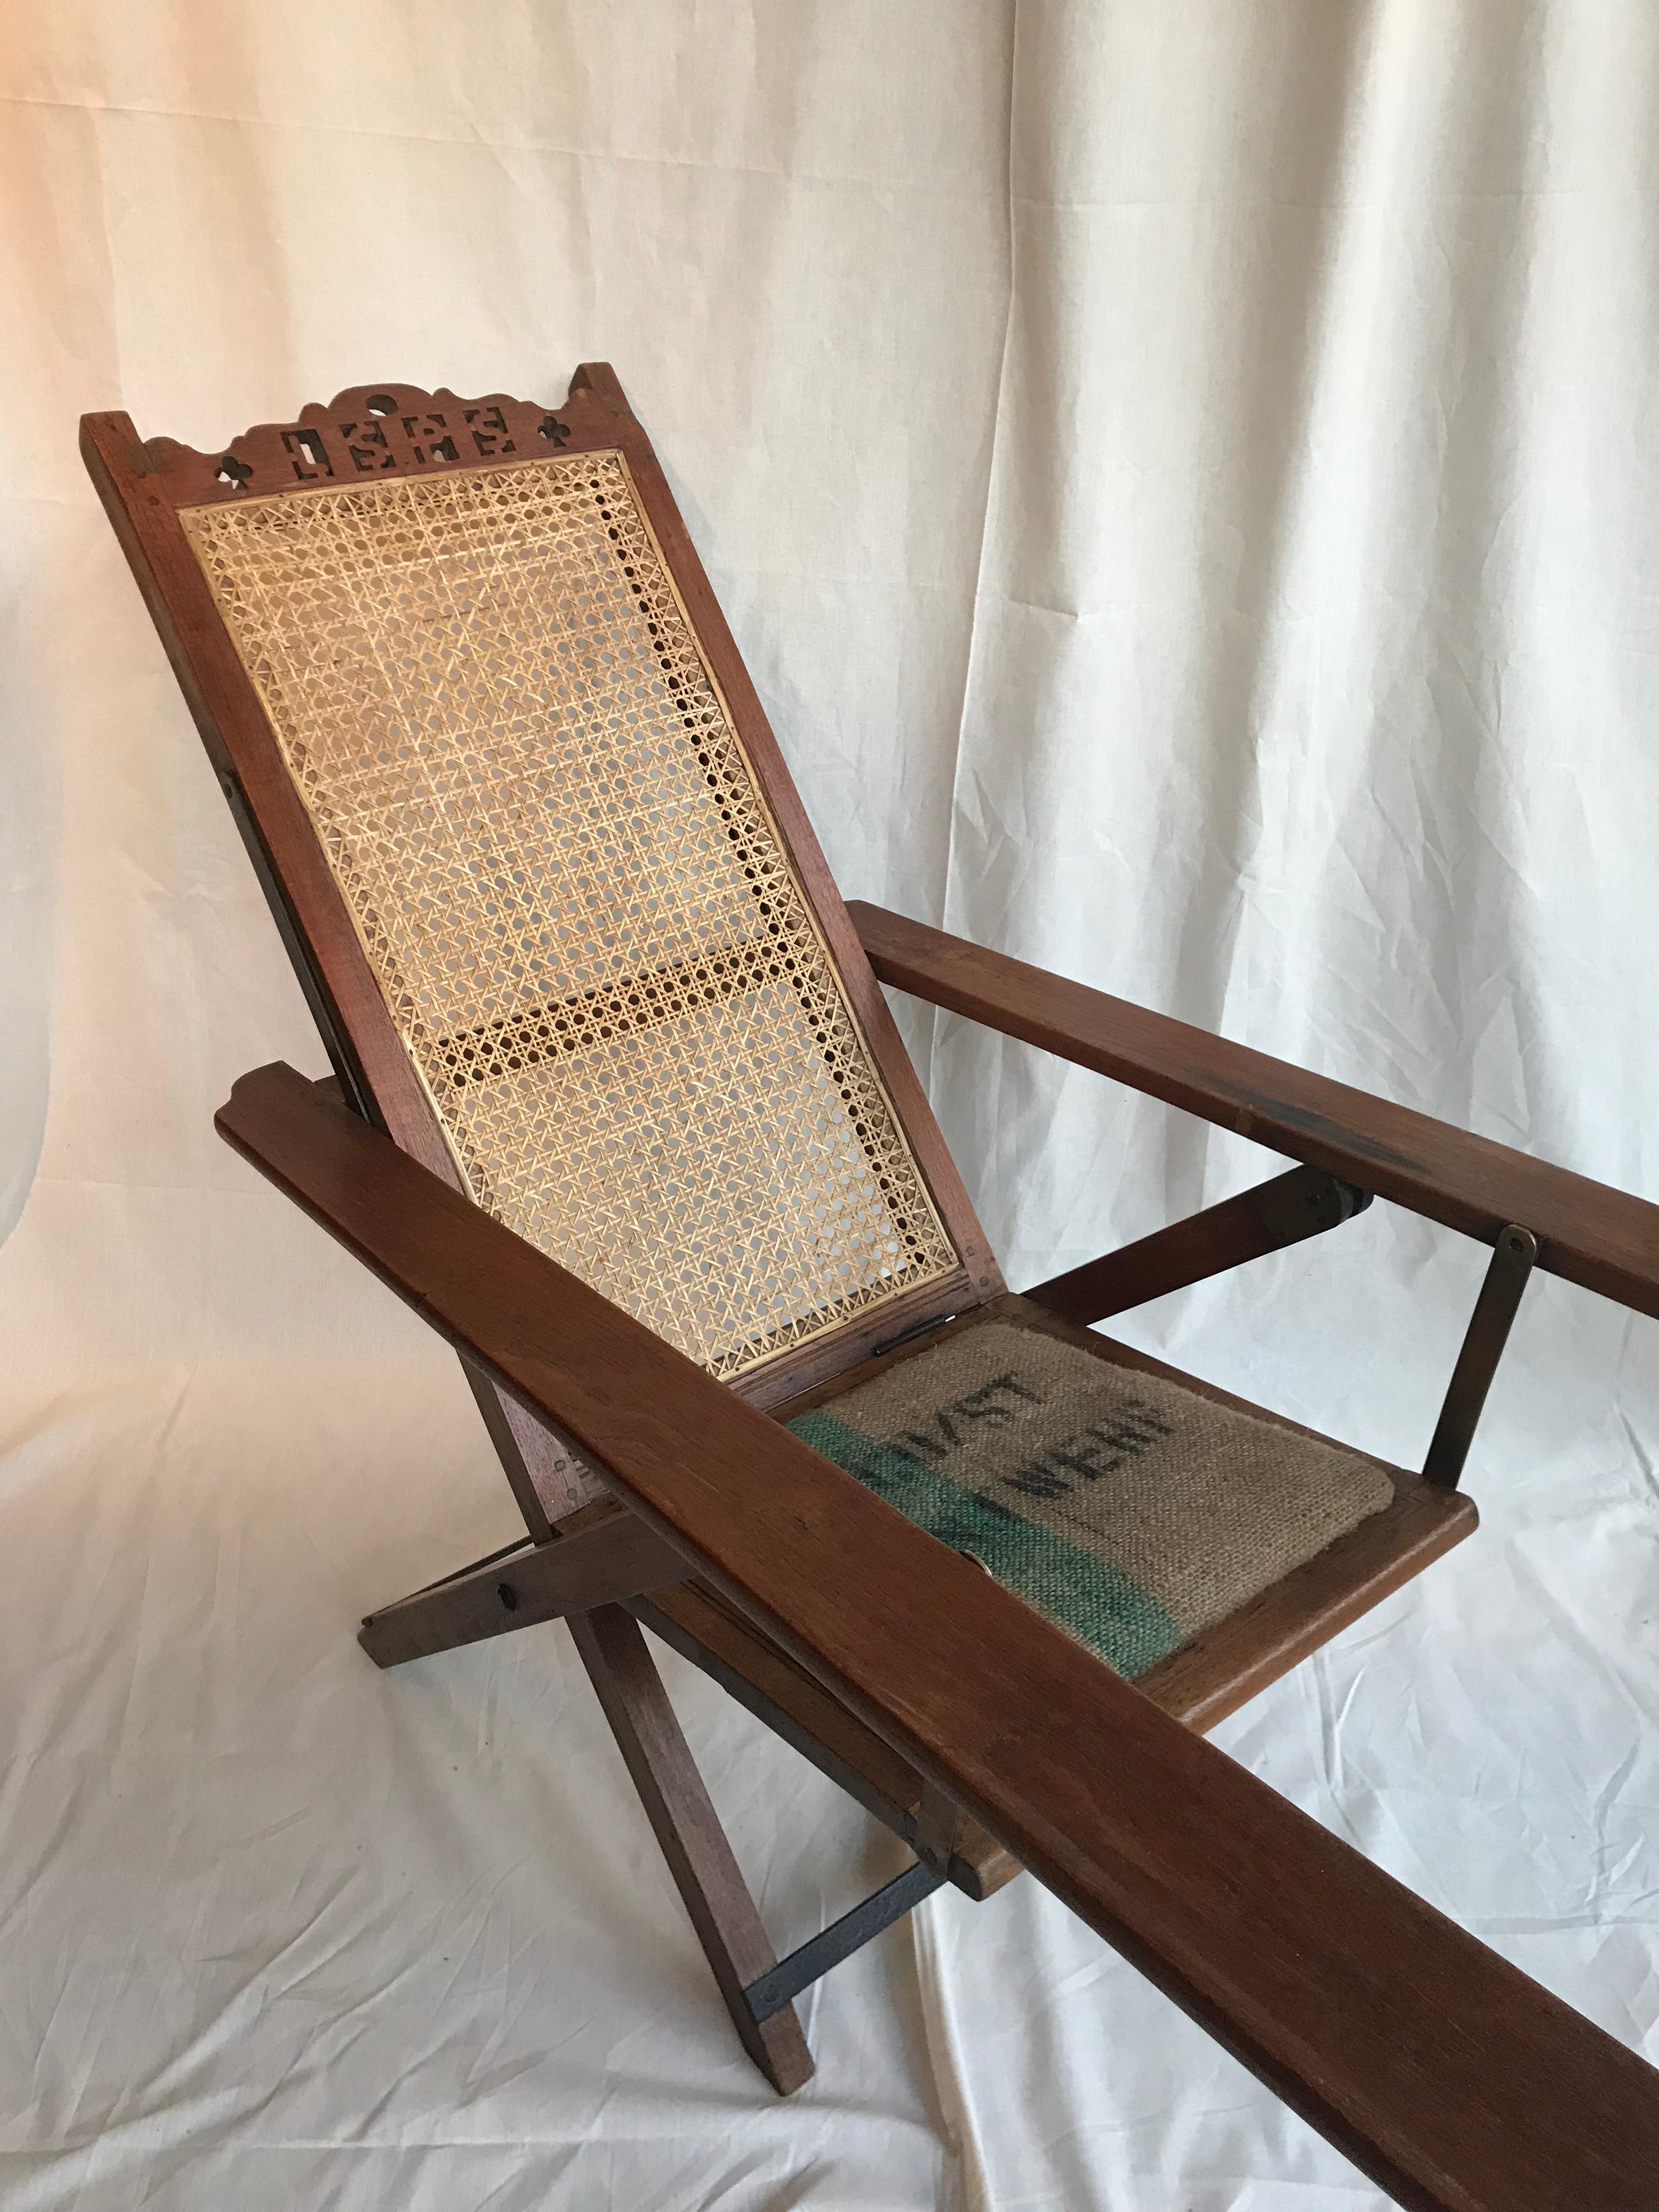 An unusual ships deck chair of oak with woven cane back and jute upholstered seat.
The back crest is carved with the initials 